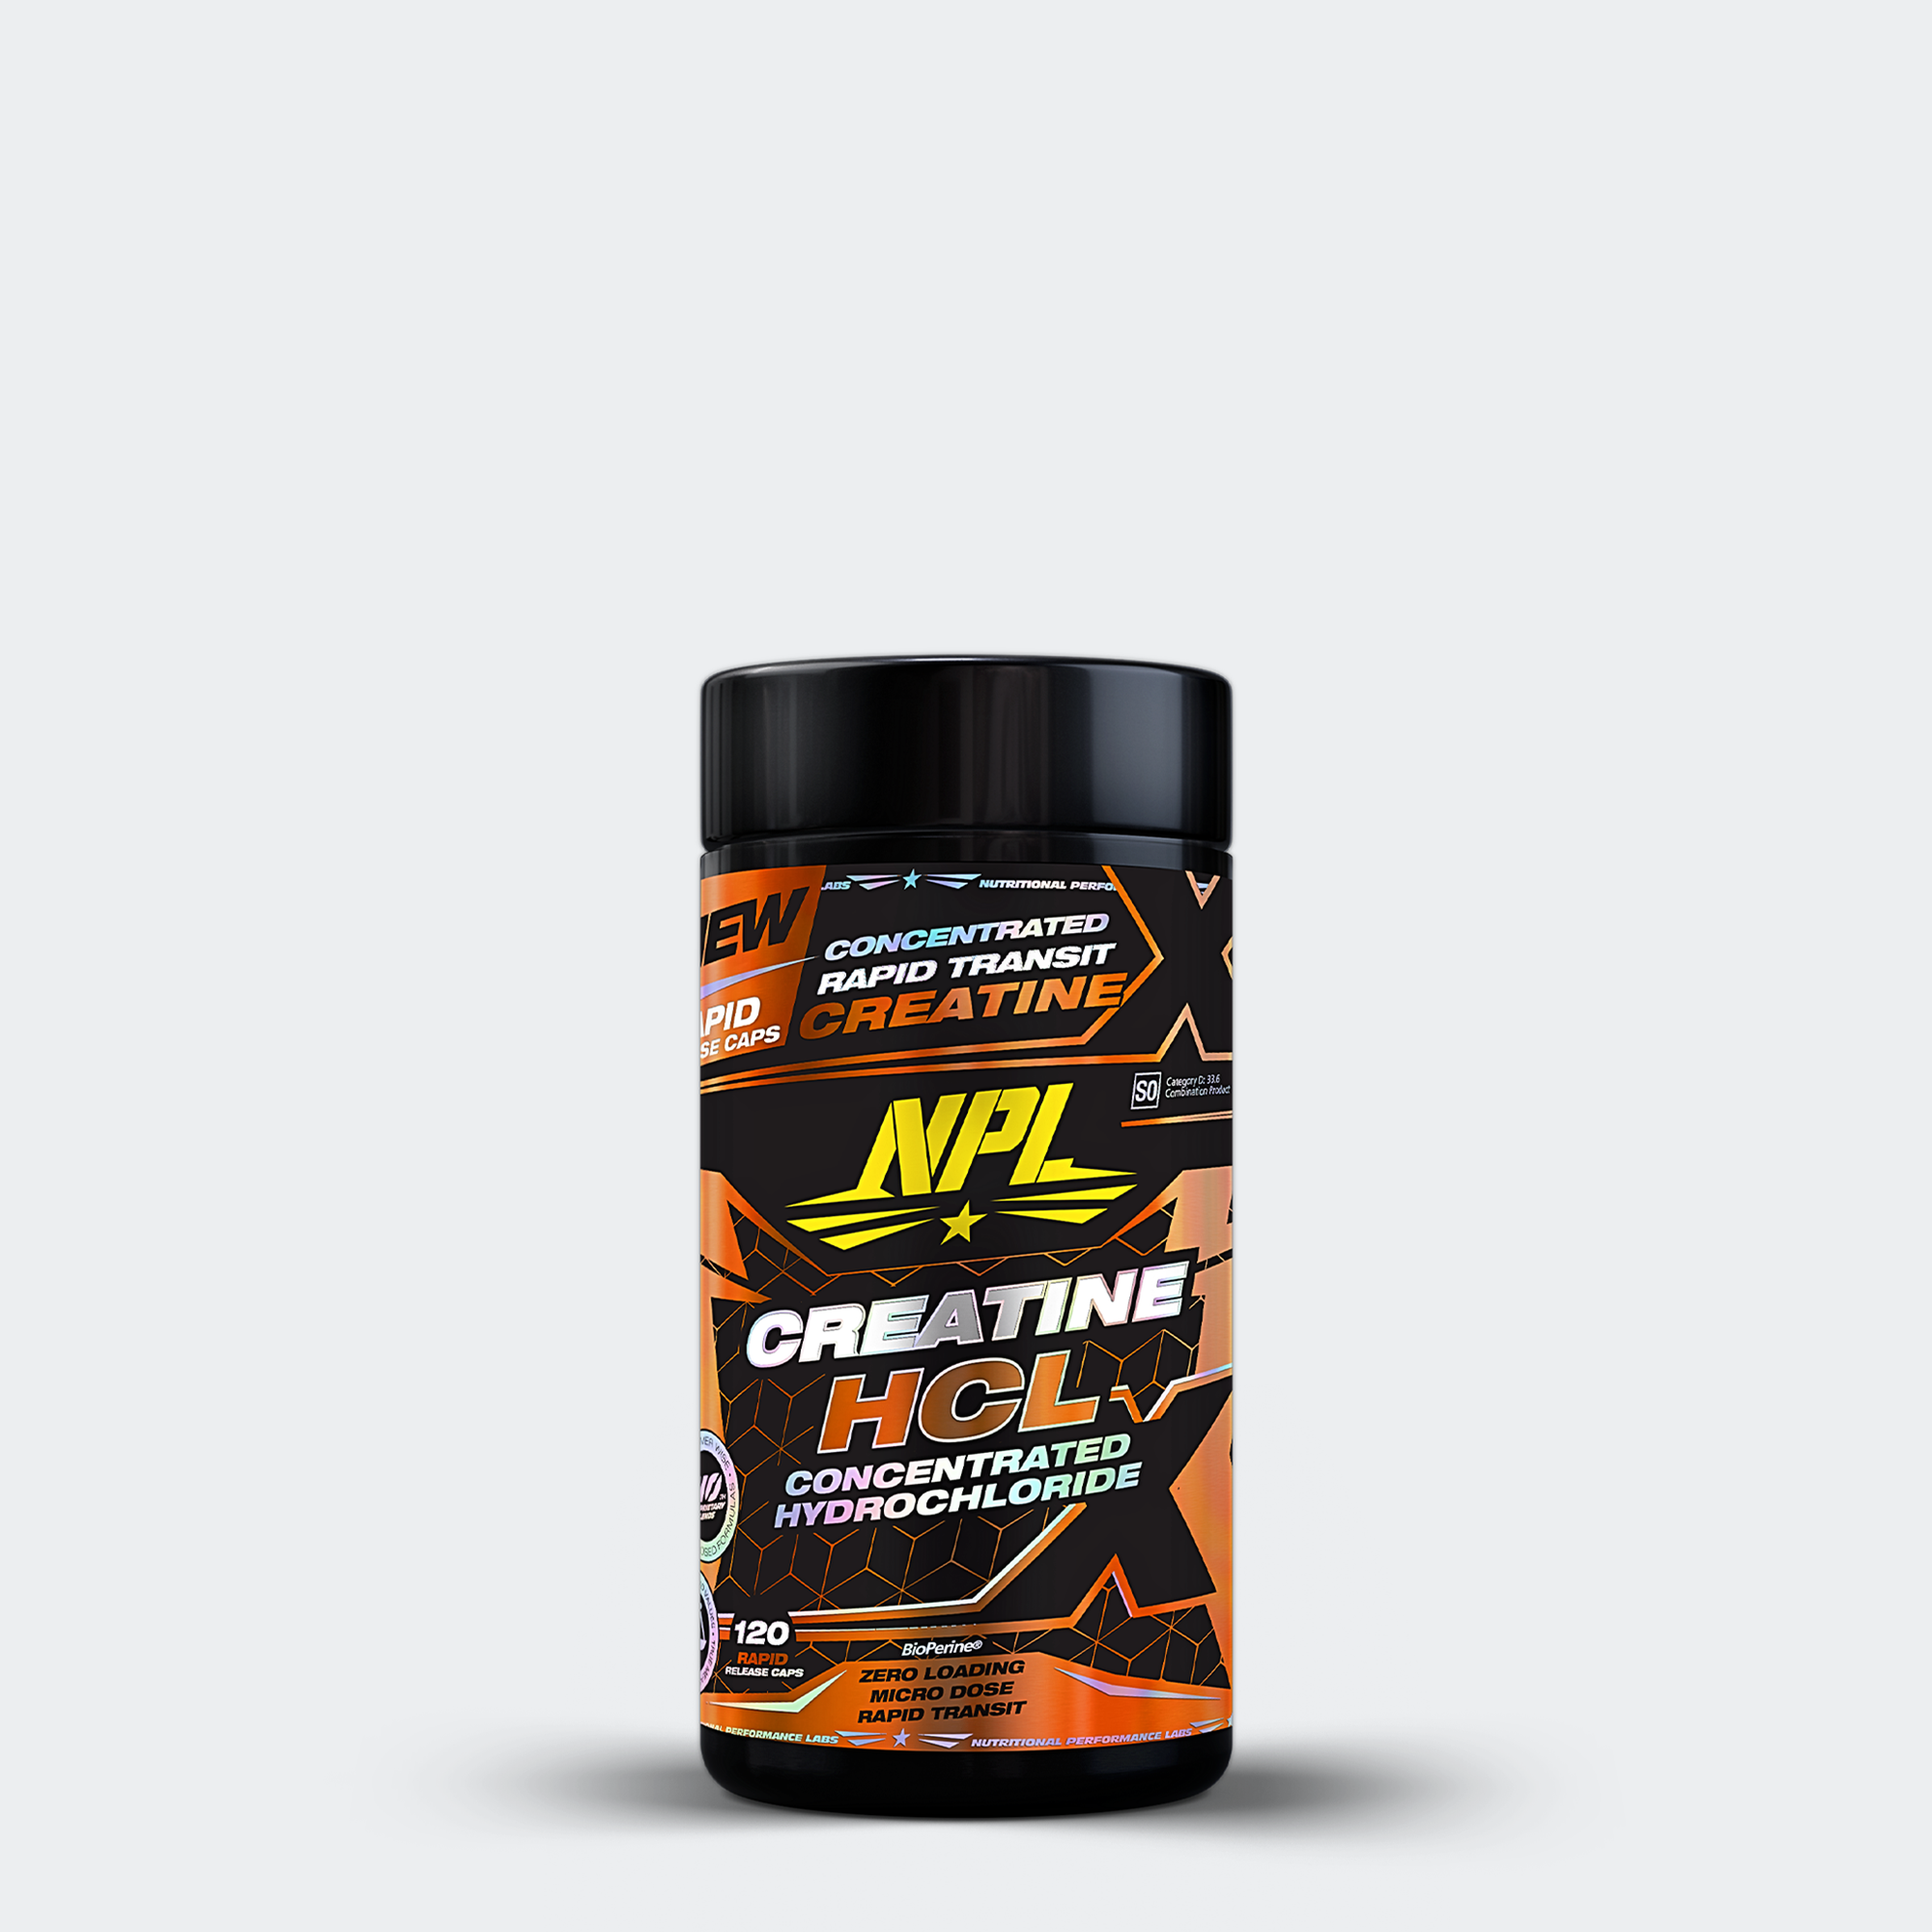 NPL Creatine HCL: Elevate Strength, Recovery, and Performance